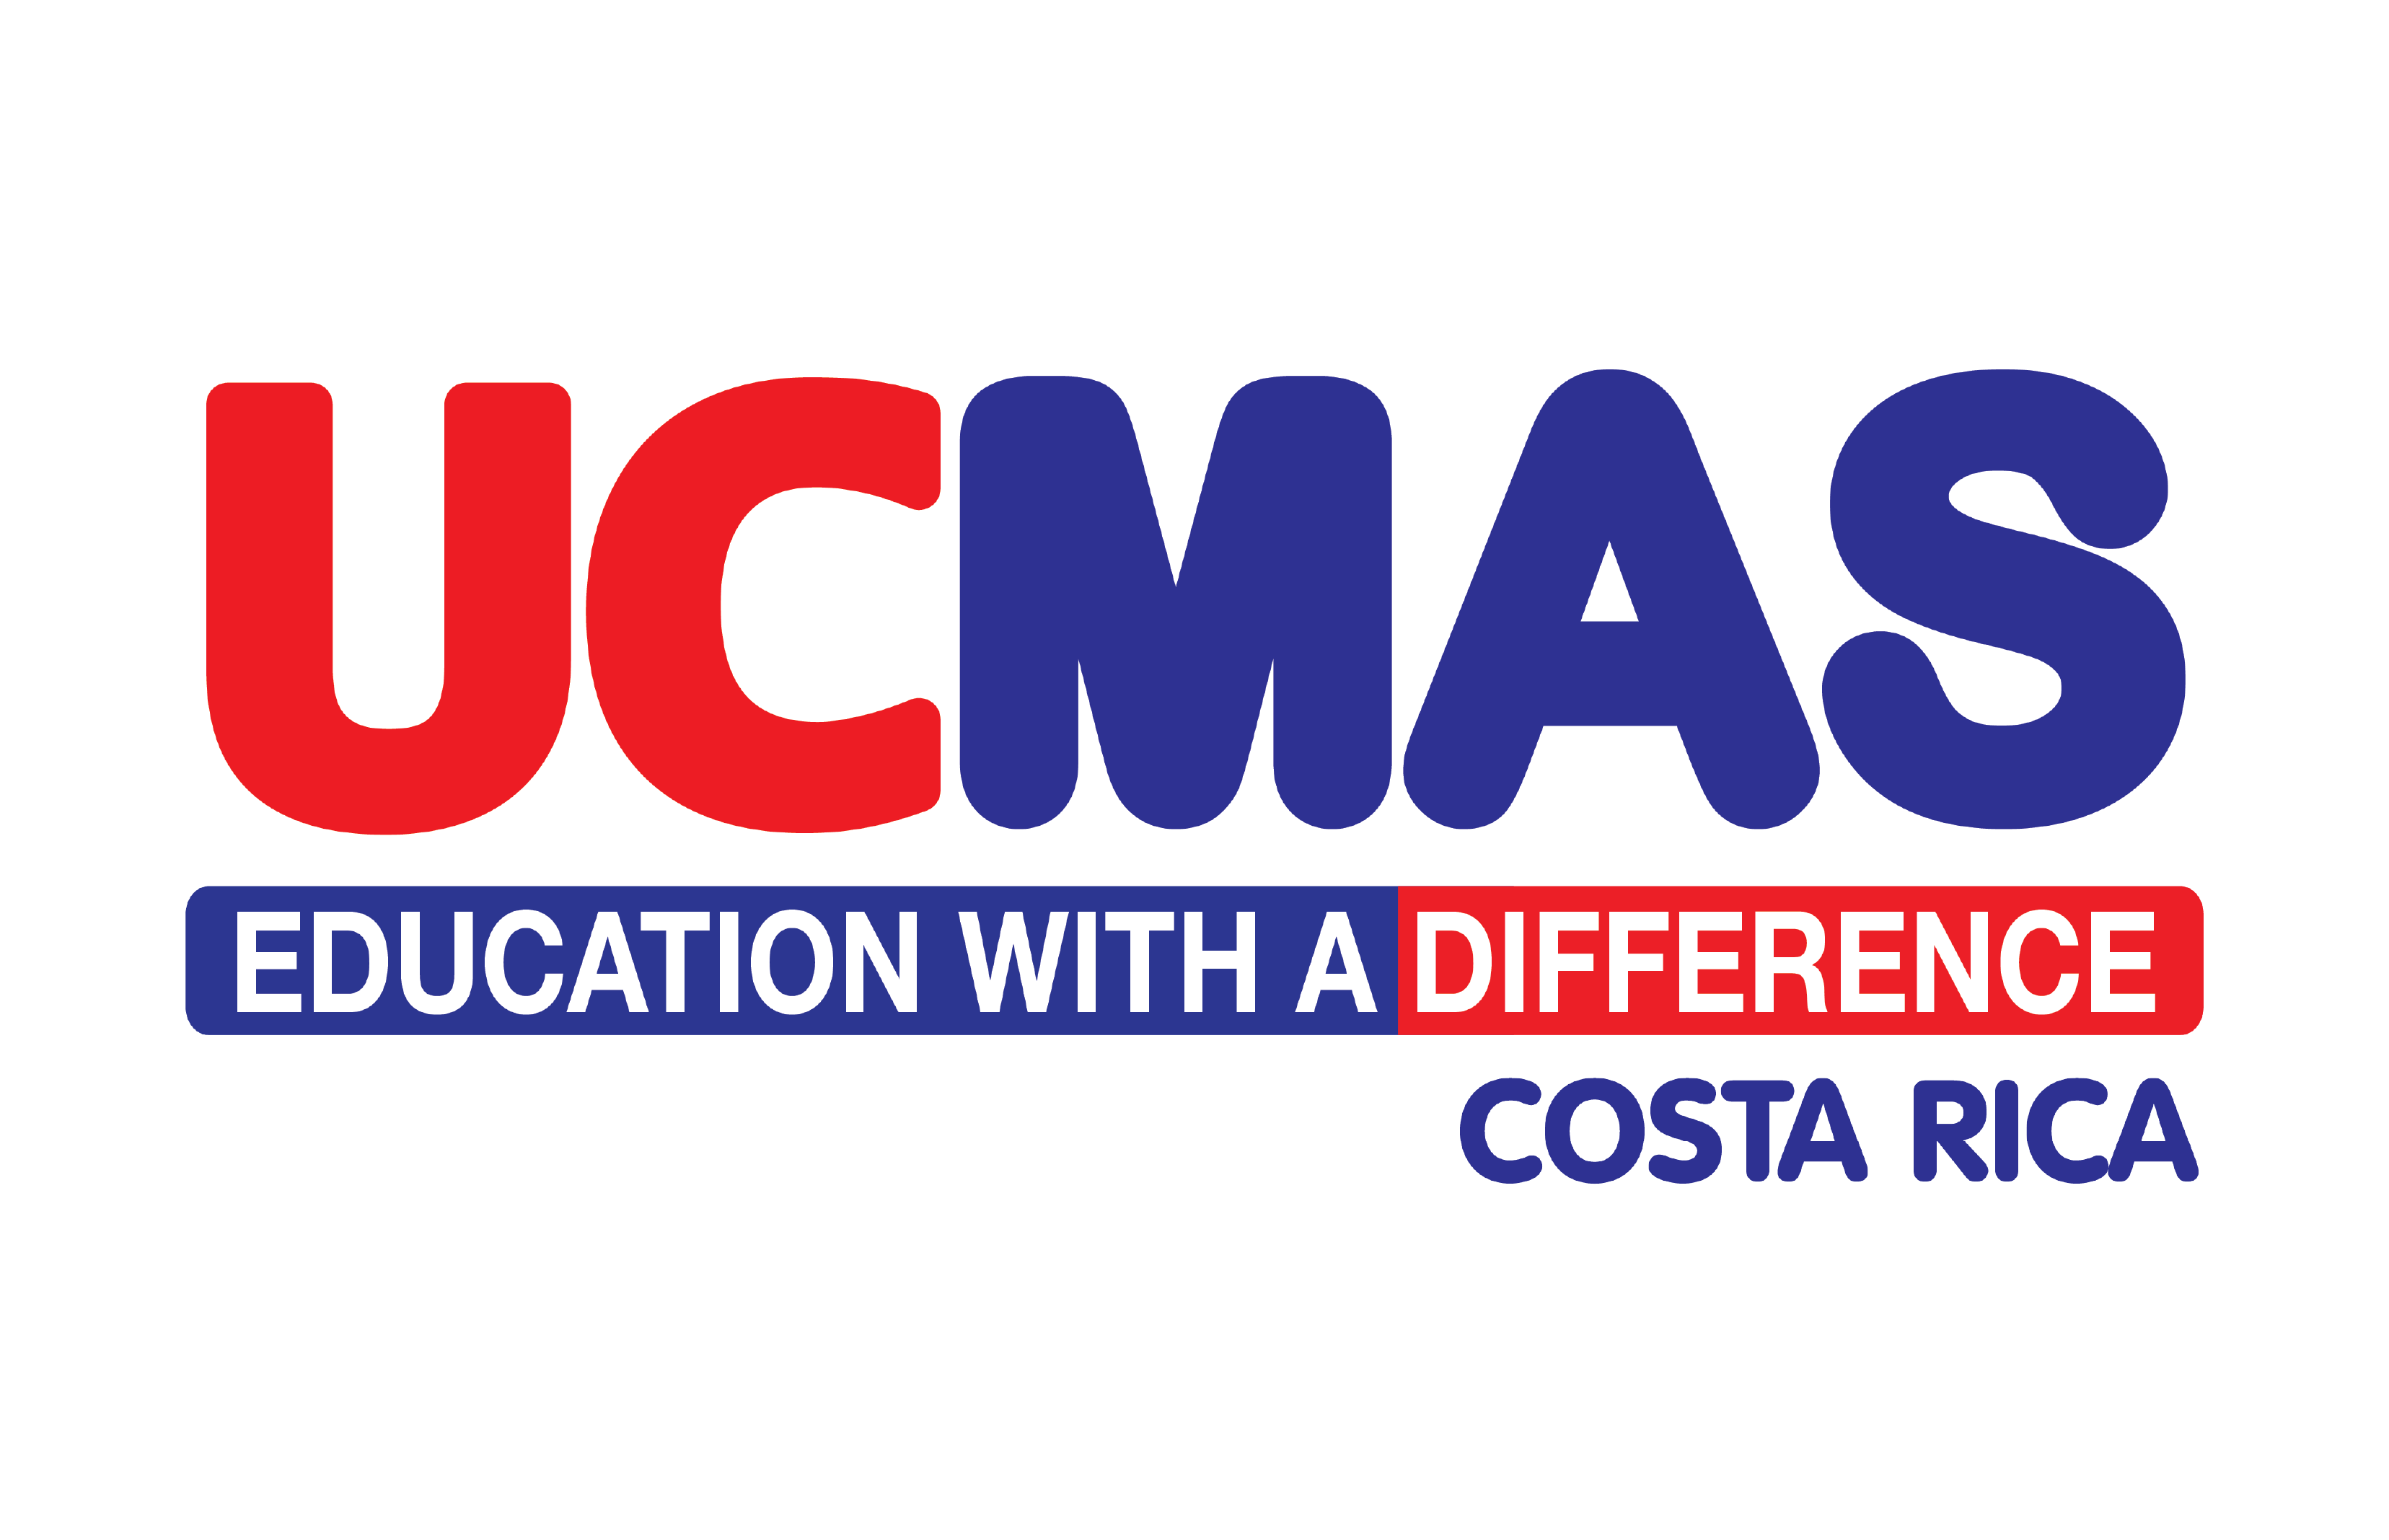 UCMAS – Education with a difference